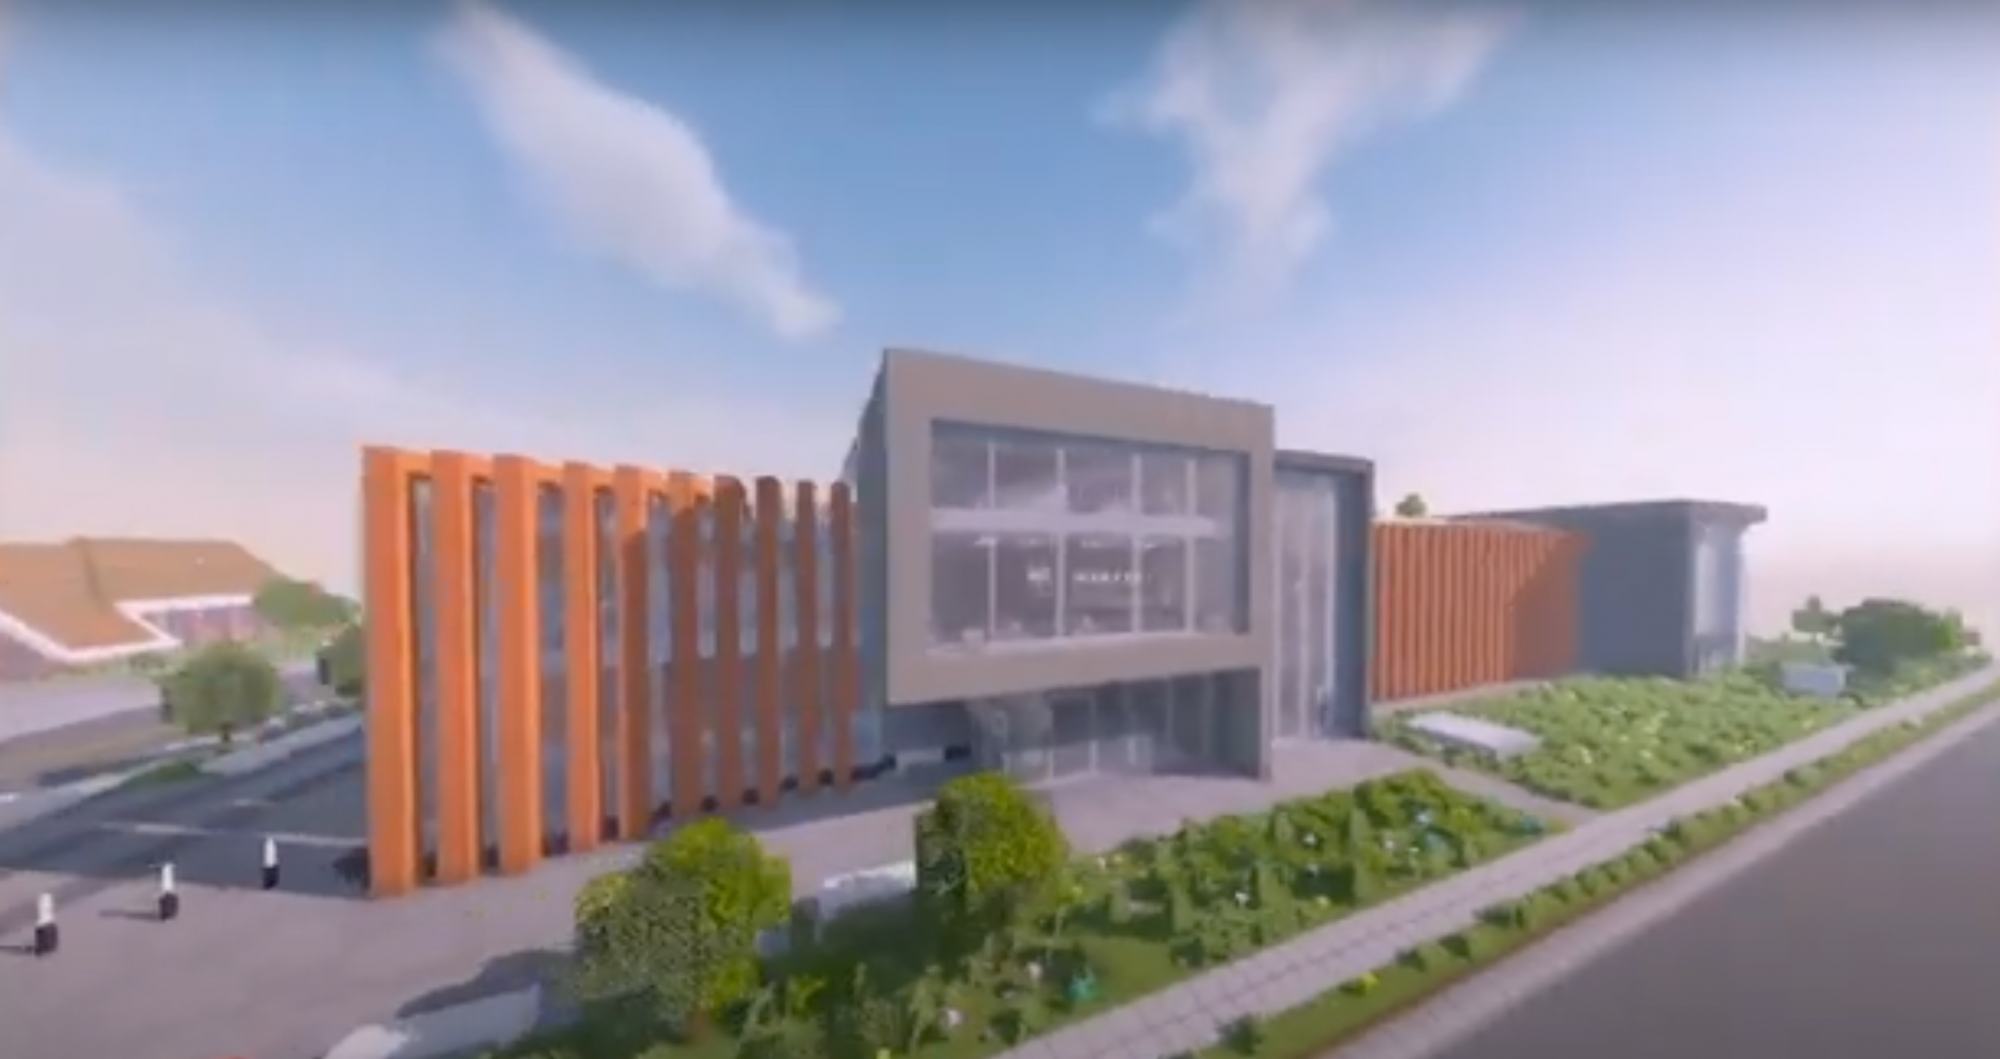 A screenshot shows the Ed Lumley Centre for Engineering Innovation students created in Minecraft.